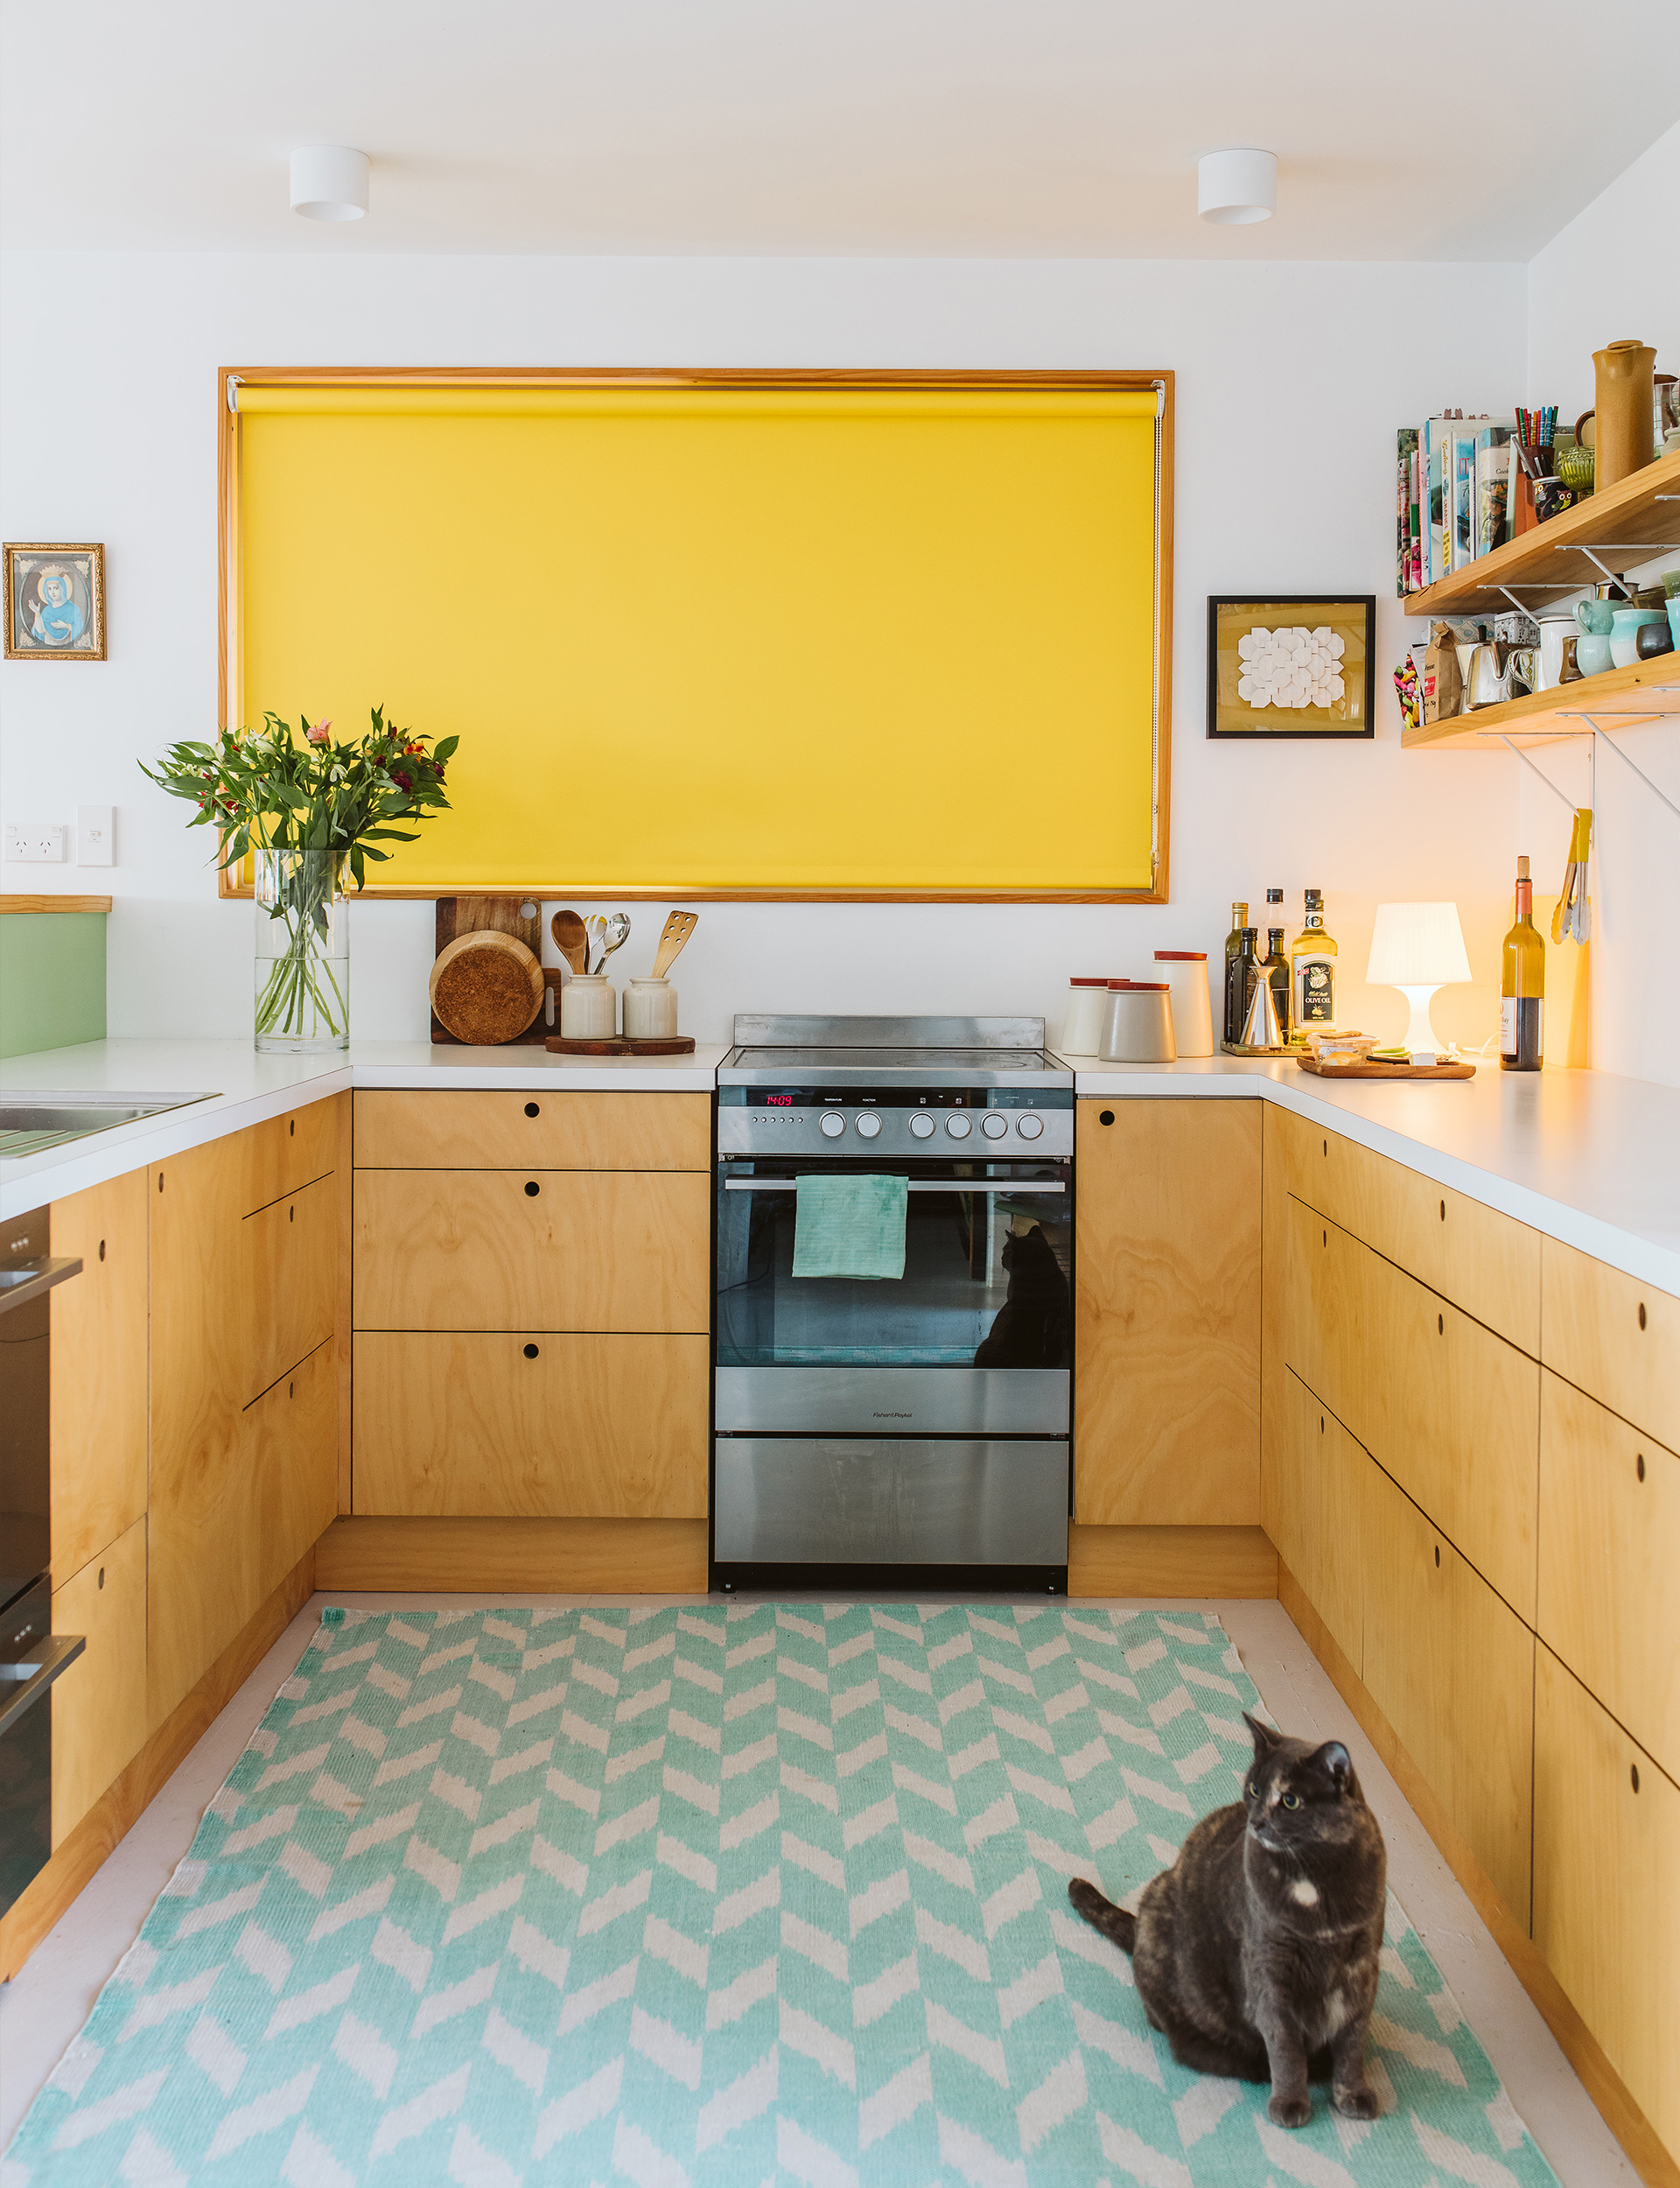 Yellow accents in the kitchen